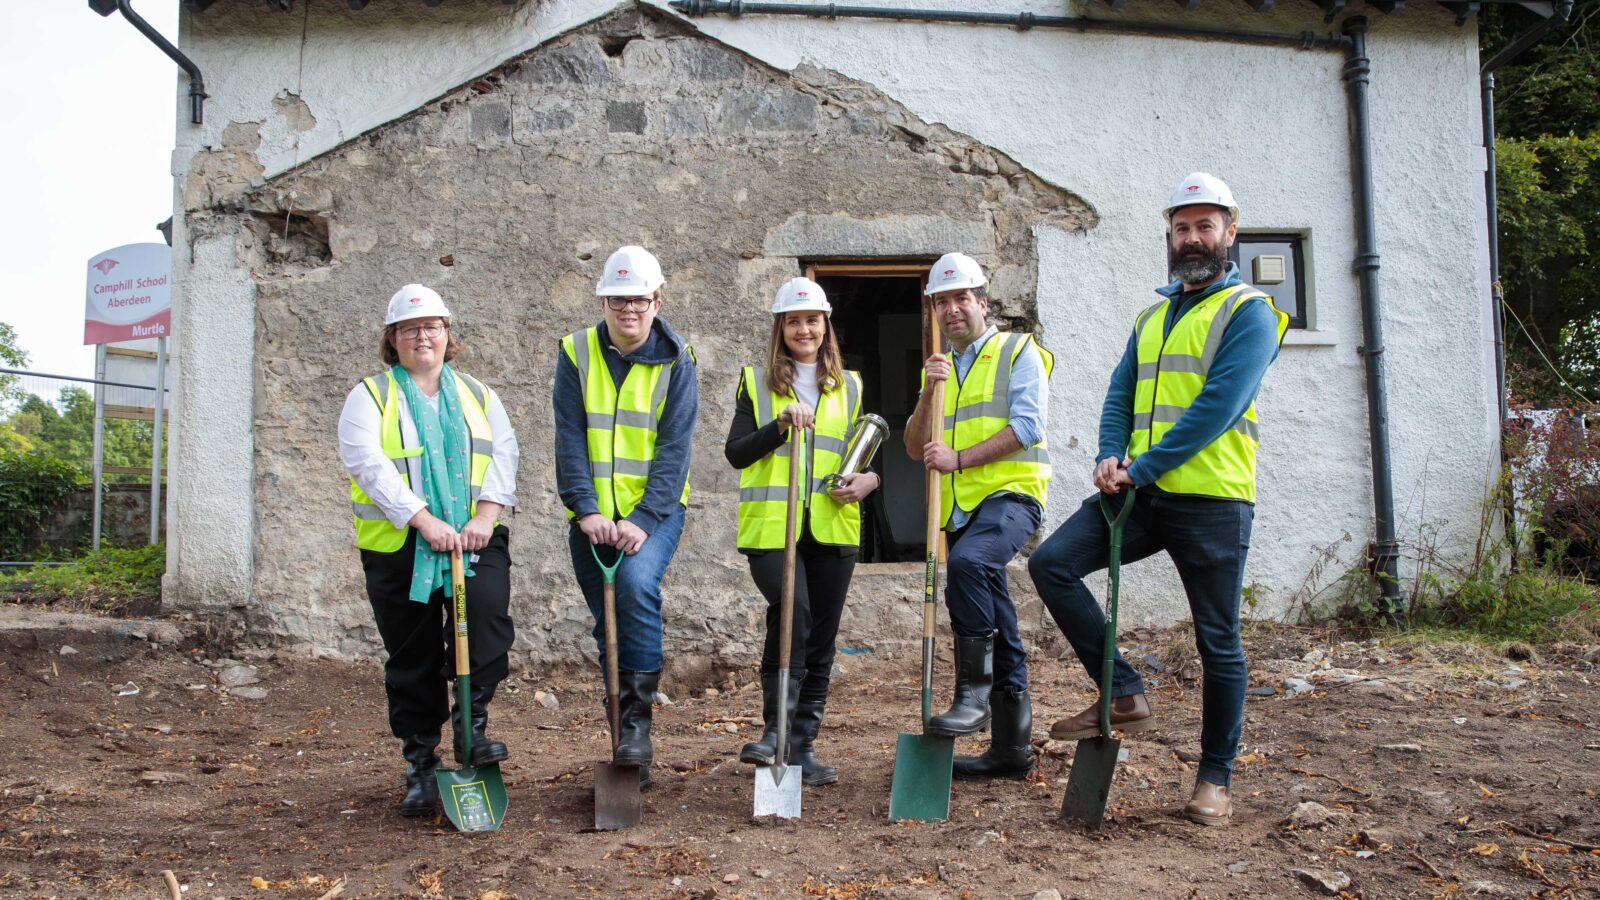 Scotland’s Cabinet Secretary for Net Zero Màiri McAllan MSP helps to bury a time capsule containing wishes on the site of new social enterprise Murtle Market, part of Camphill School Aberdeen's ambitious expansion plans.